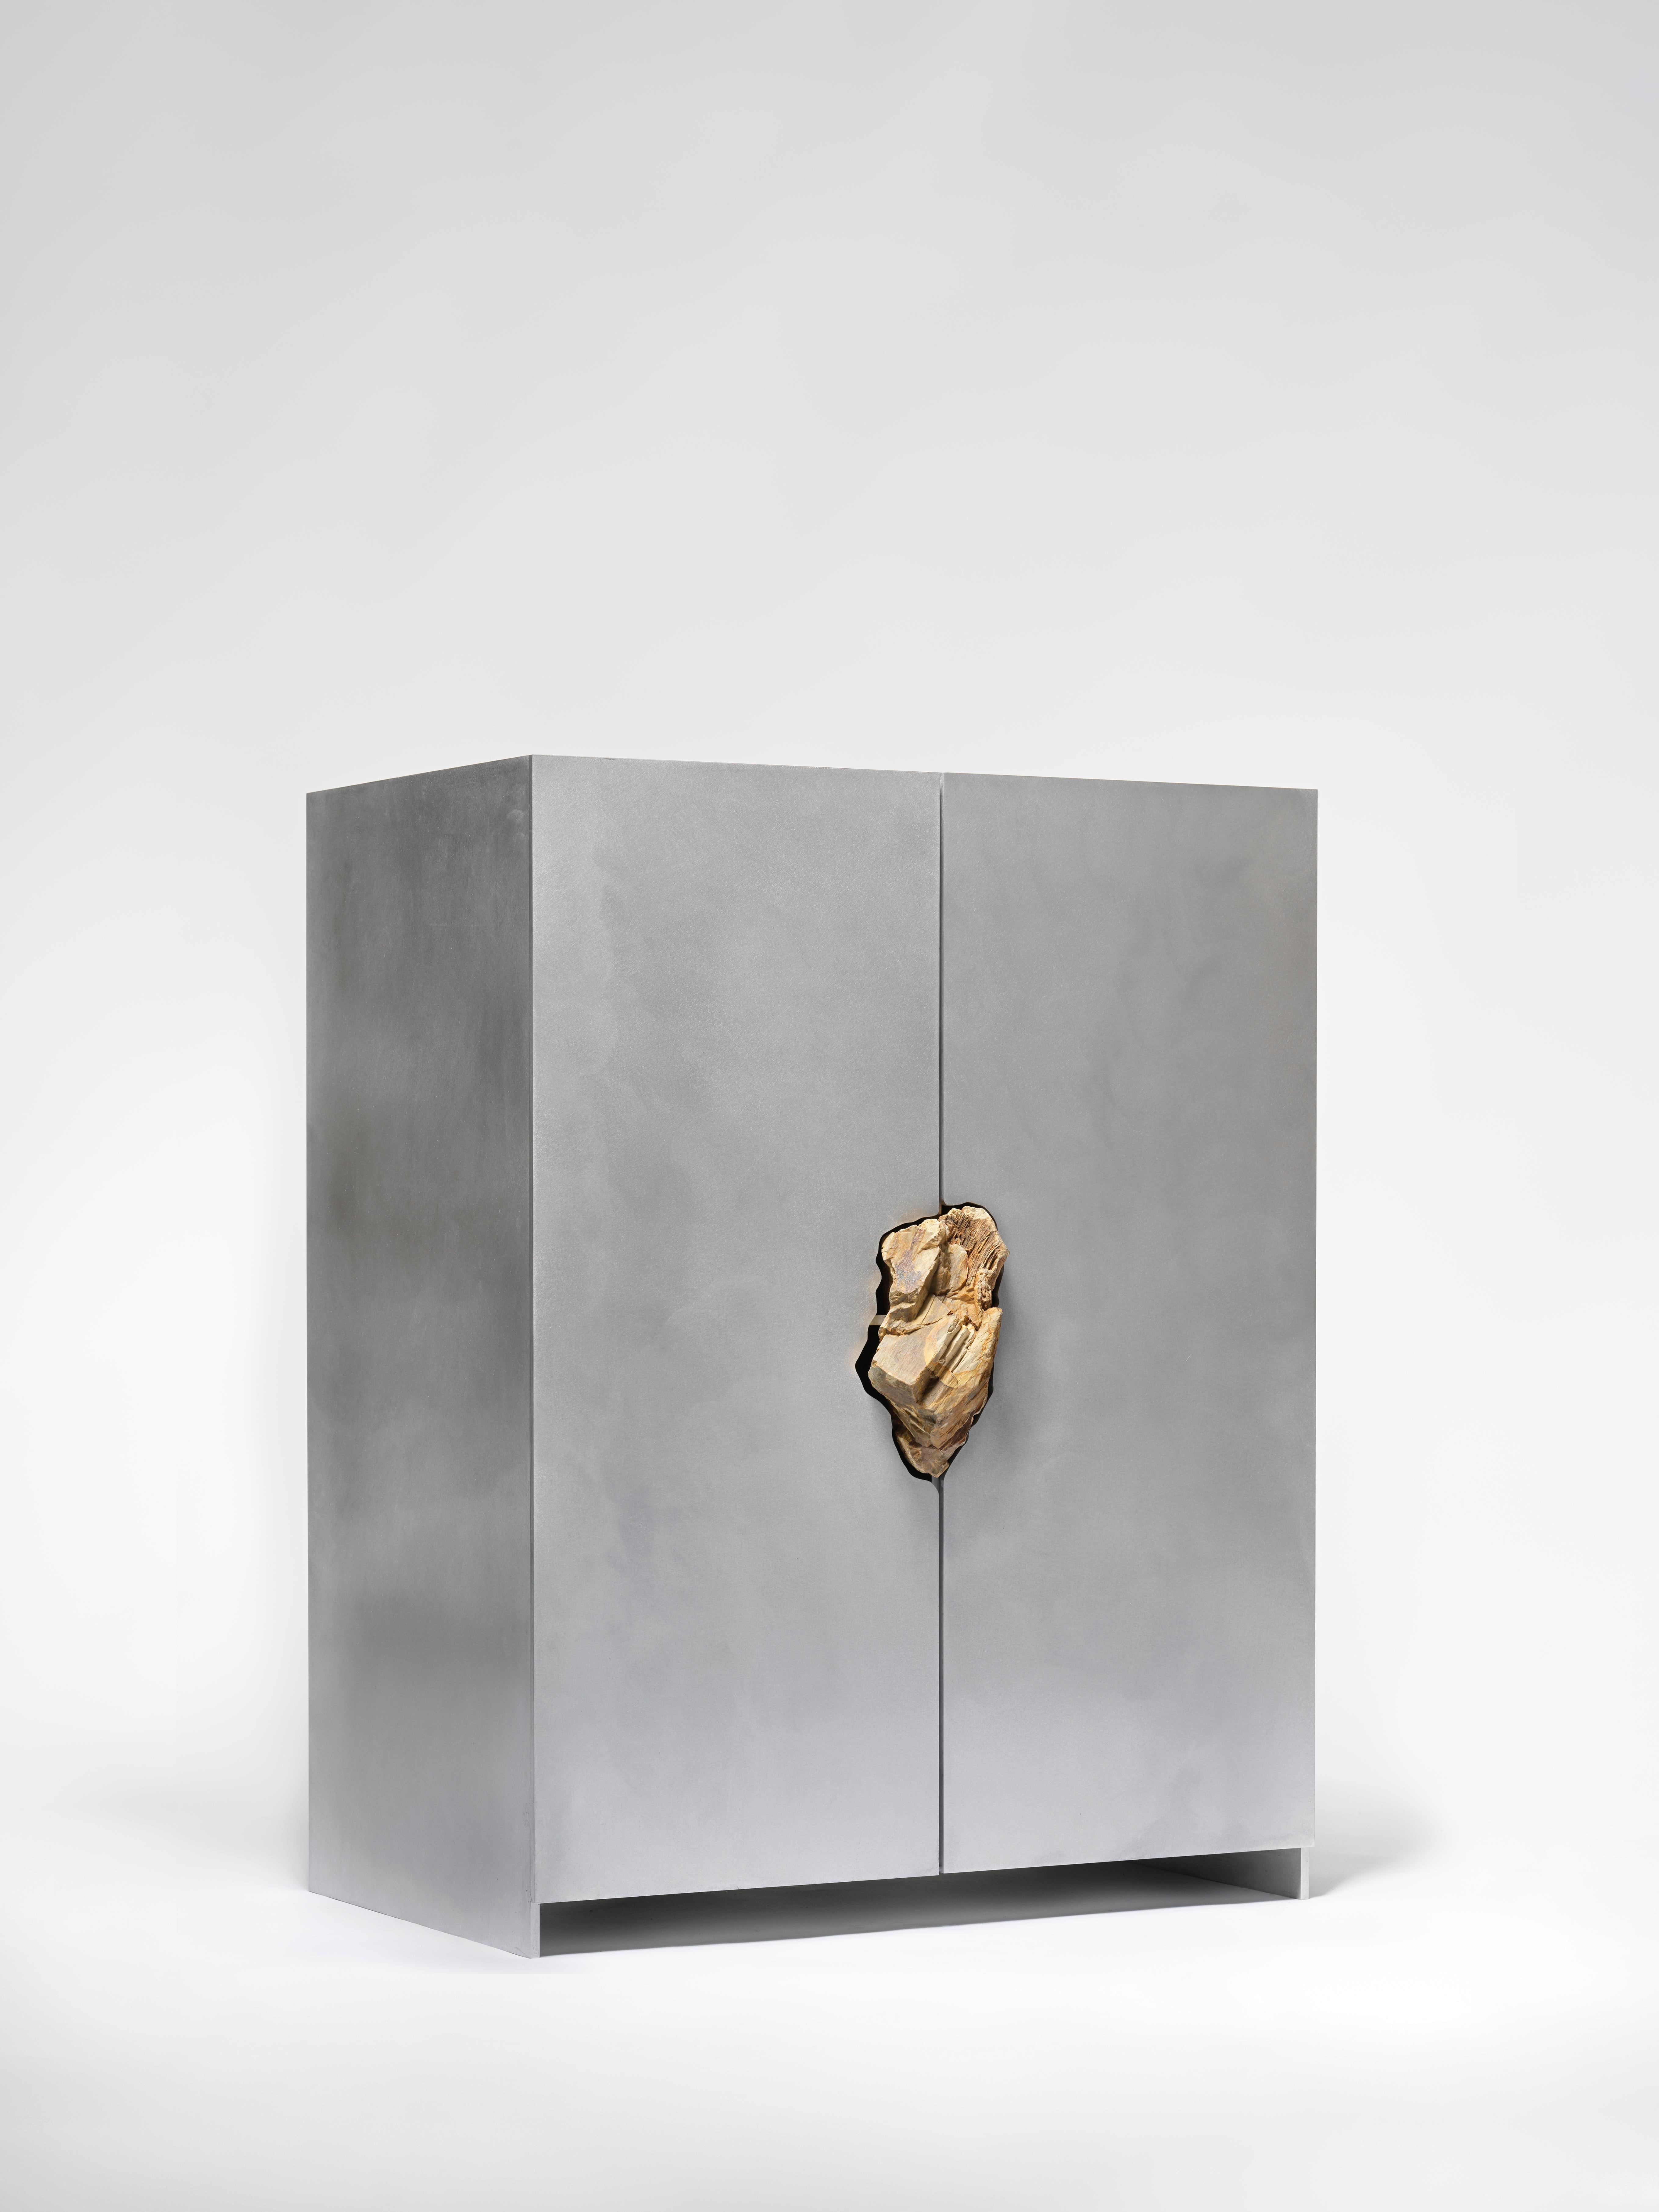 Cabinet with Petrified oak by Pierre De Valck.
Dimensions: W 70 x D 45 x H 96 cm.
Materials: Waxed aluminium with petrified oak
Weight: 65 kg.
Each piece is unique.

Pierre De Valck (1991) born in Brussels, is a Ghent-based designer with a